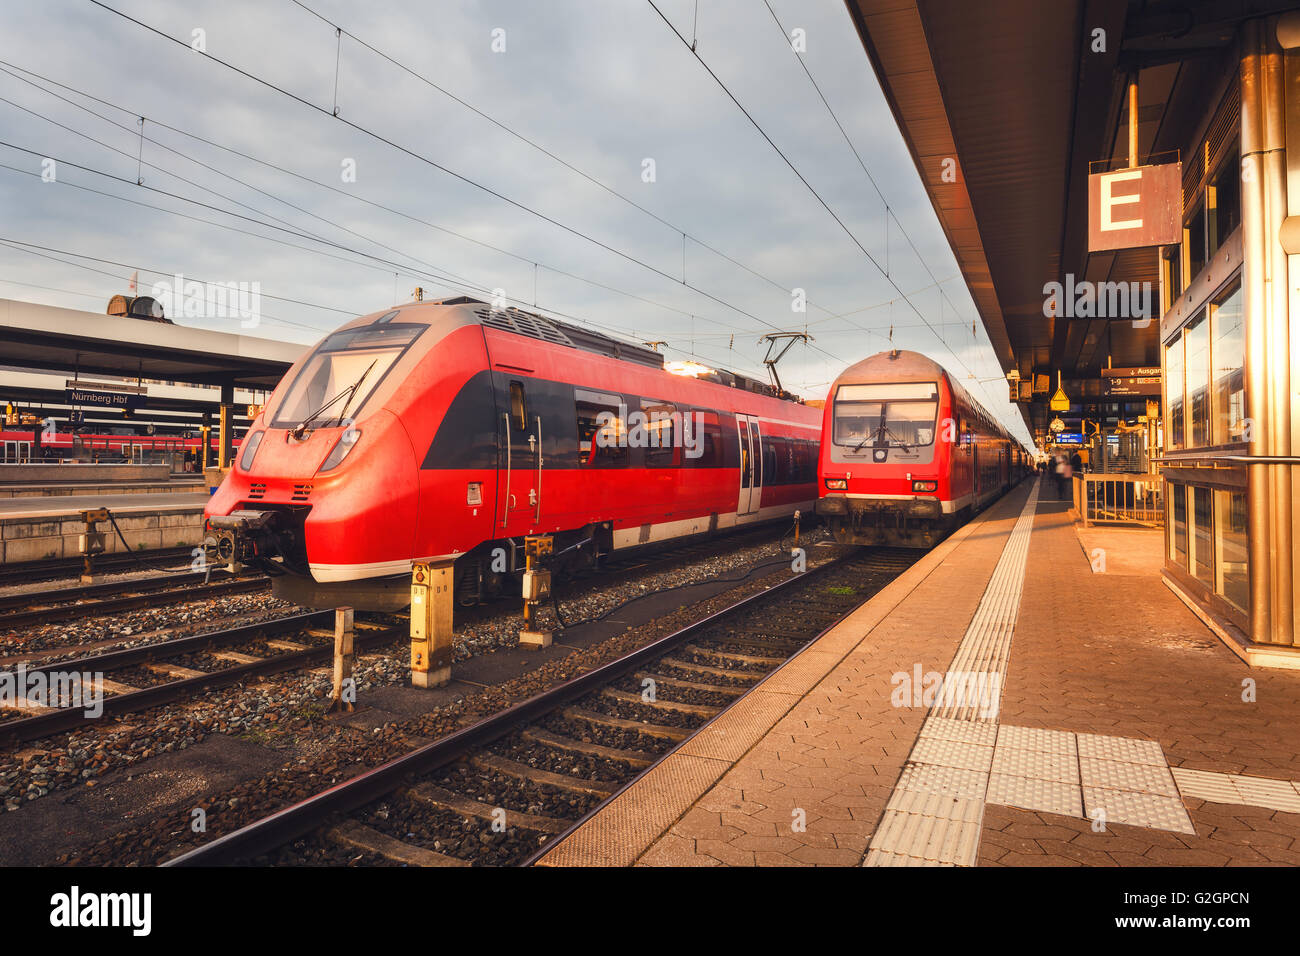 Beautiful railway station with modern red commuter train at colorful sunset in Nuremberg, Germany. Railroad with vintage toning Stock Photo